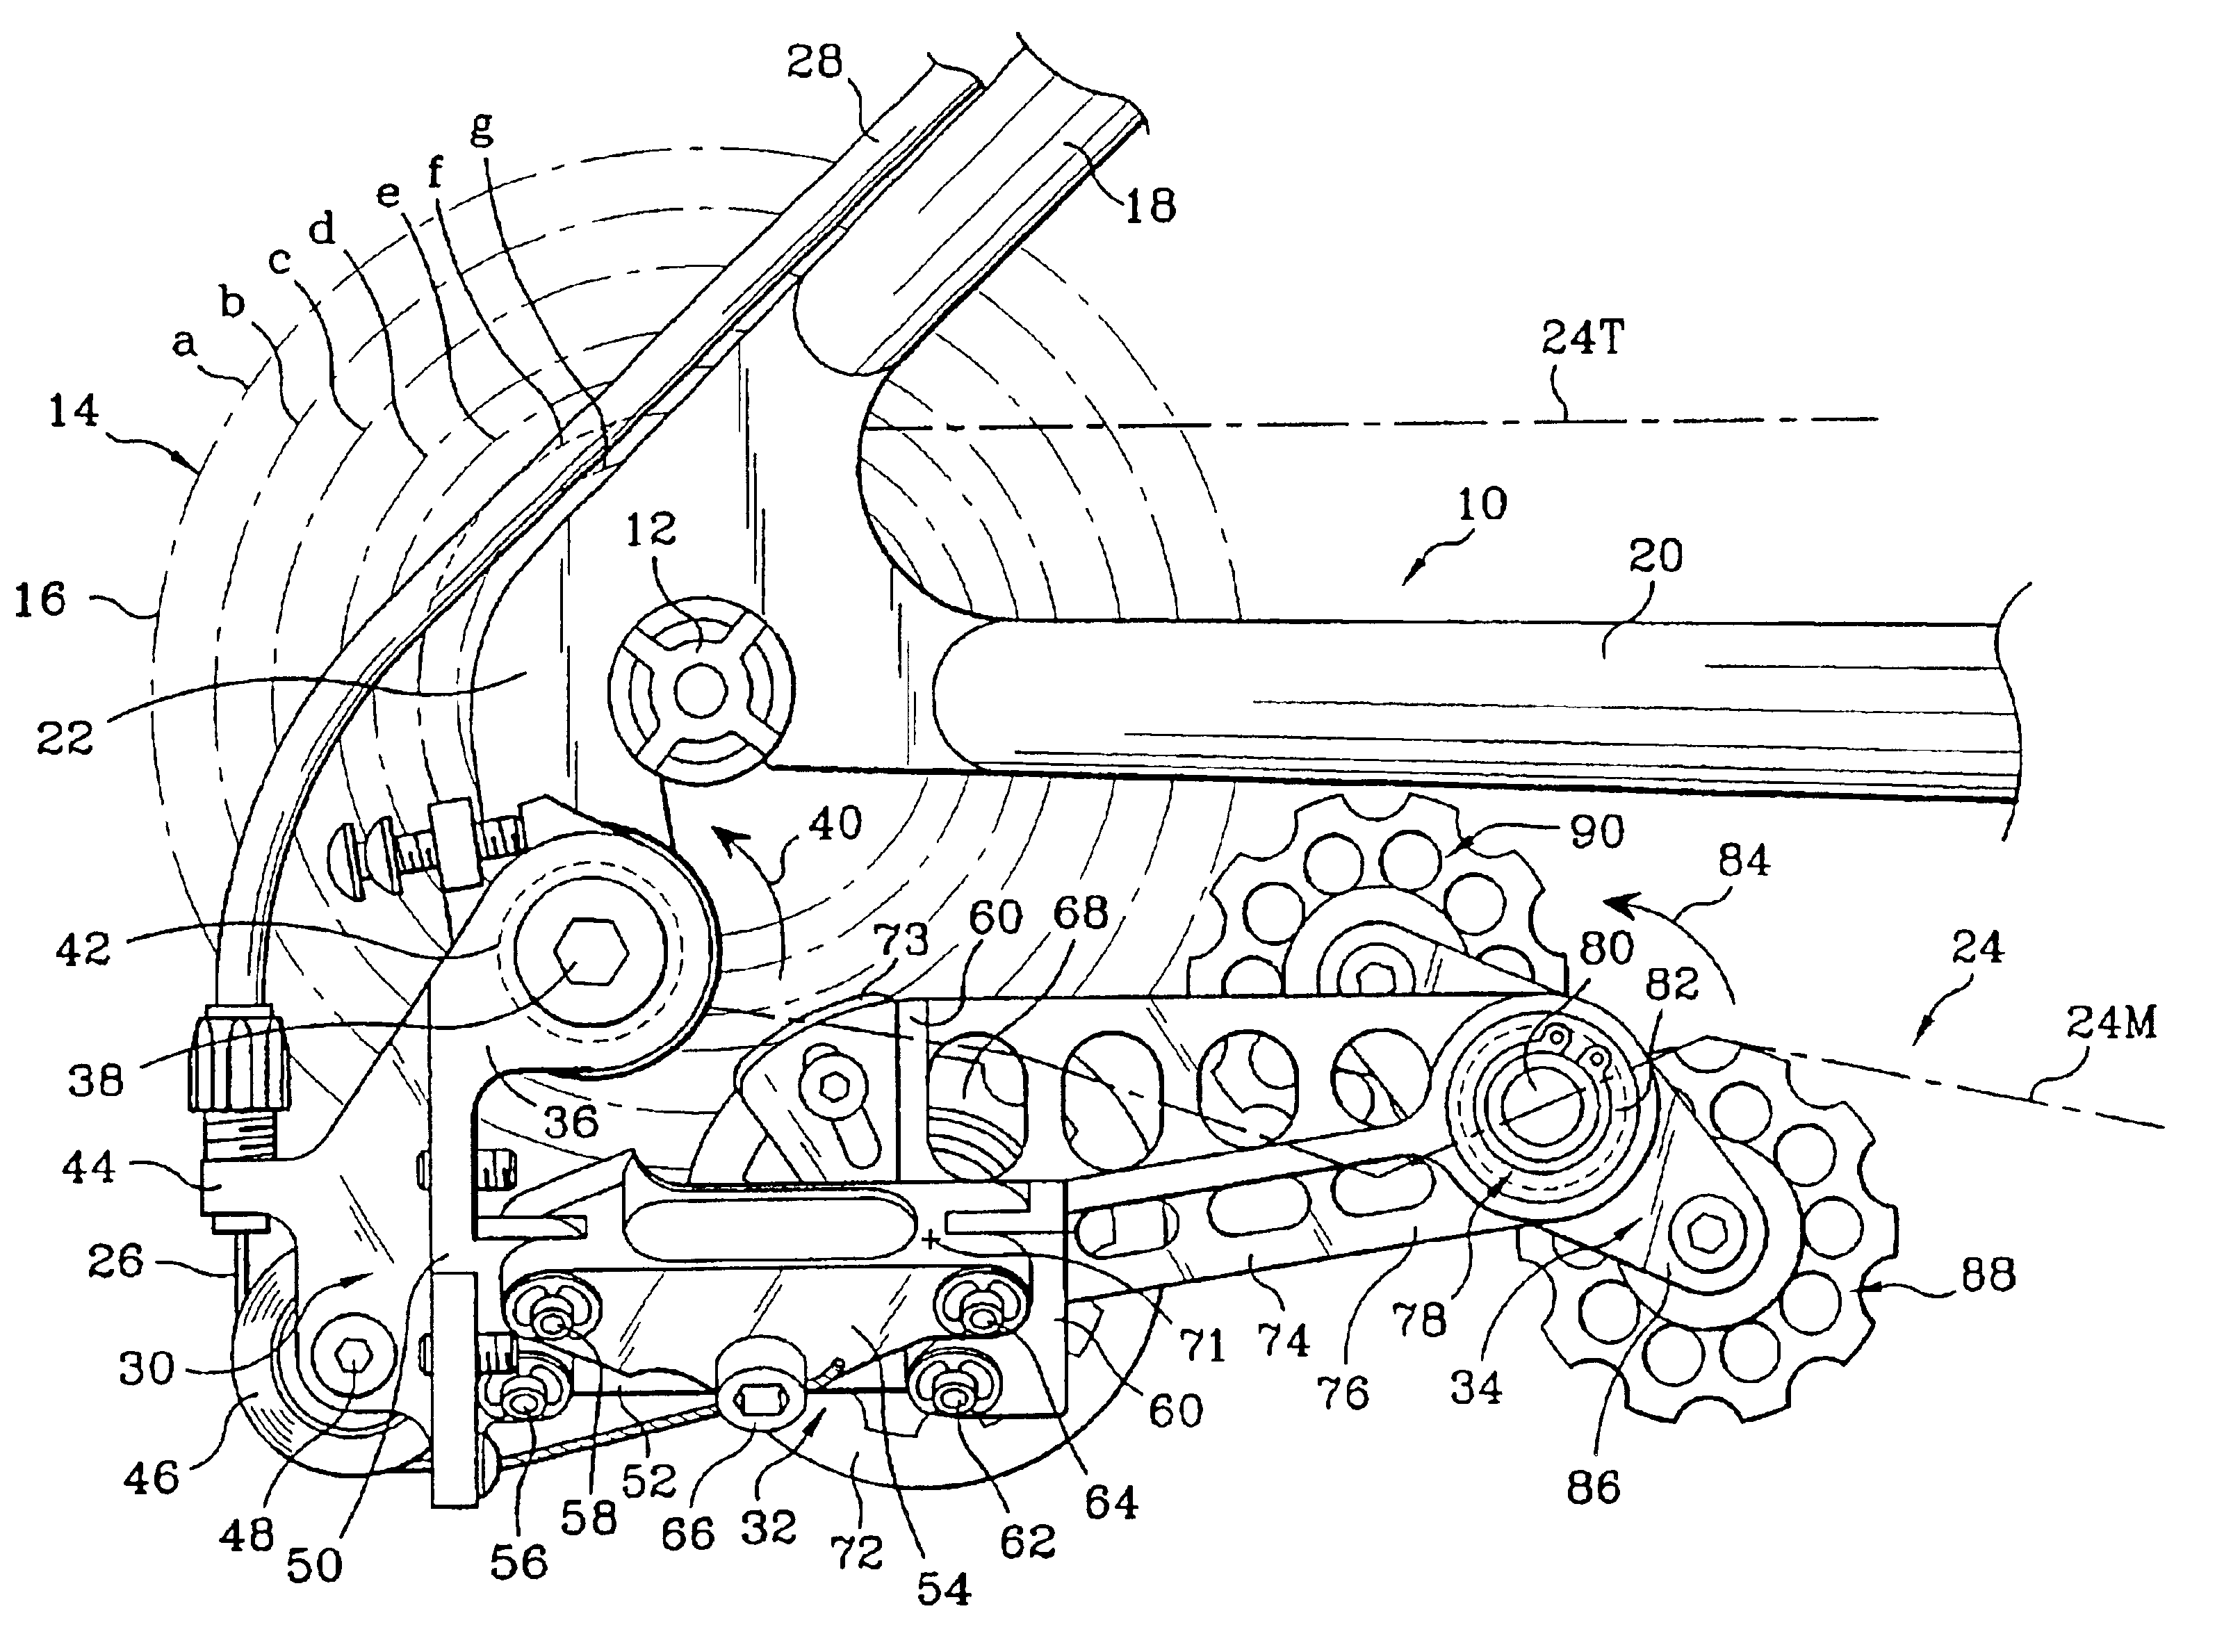 Rear derailleur device for a bicycle